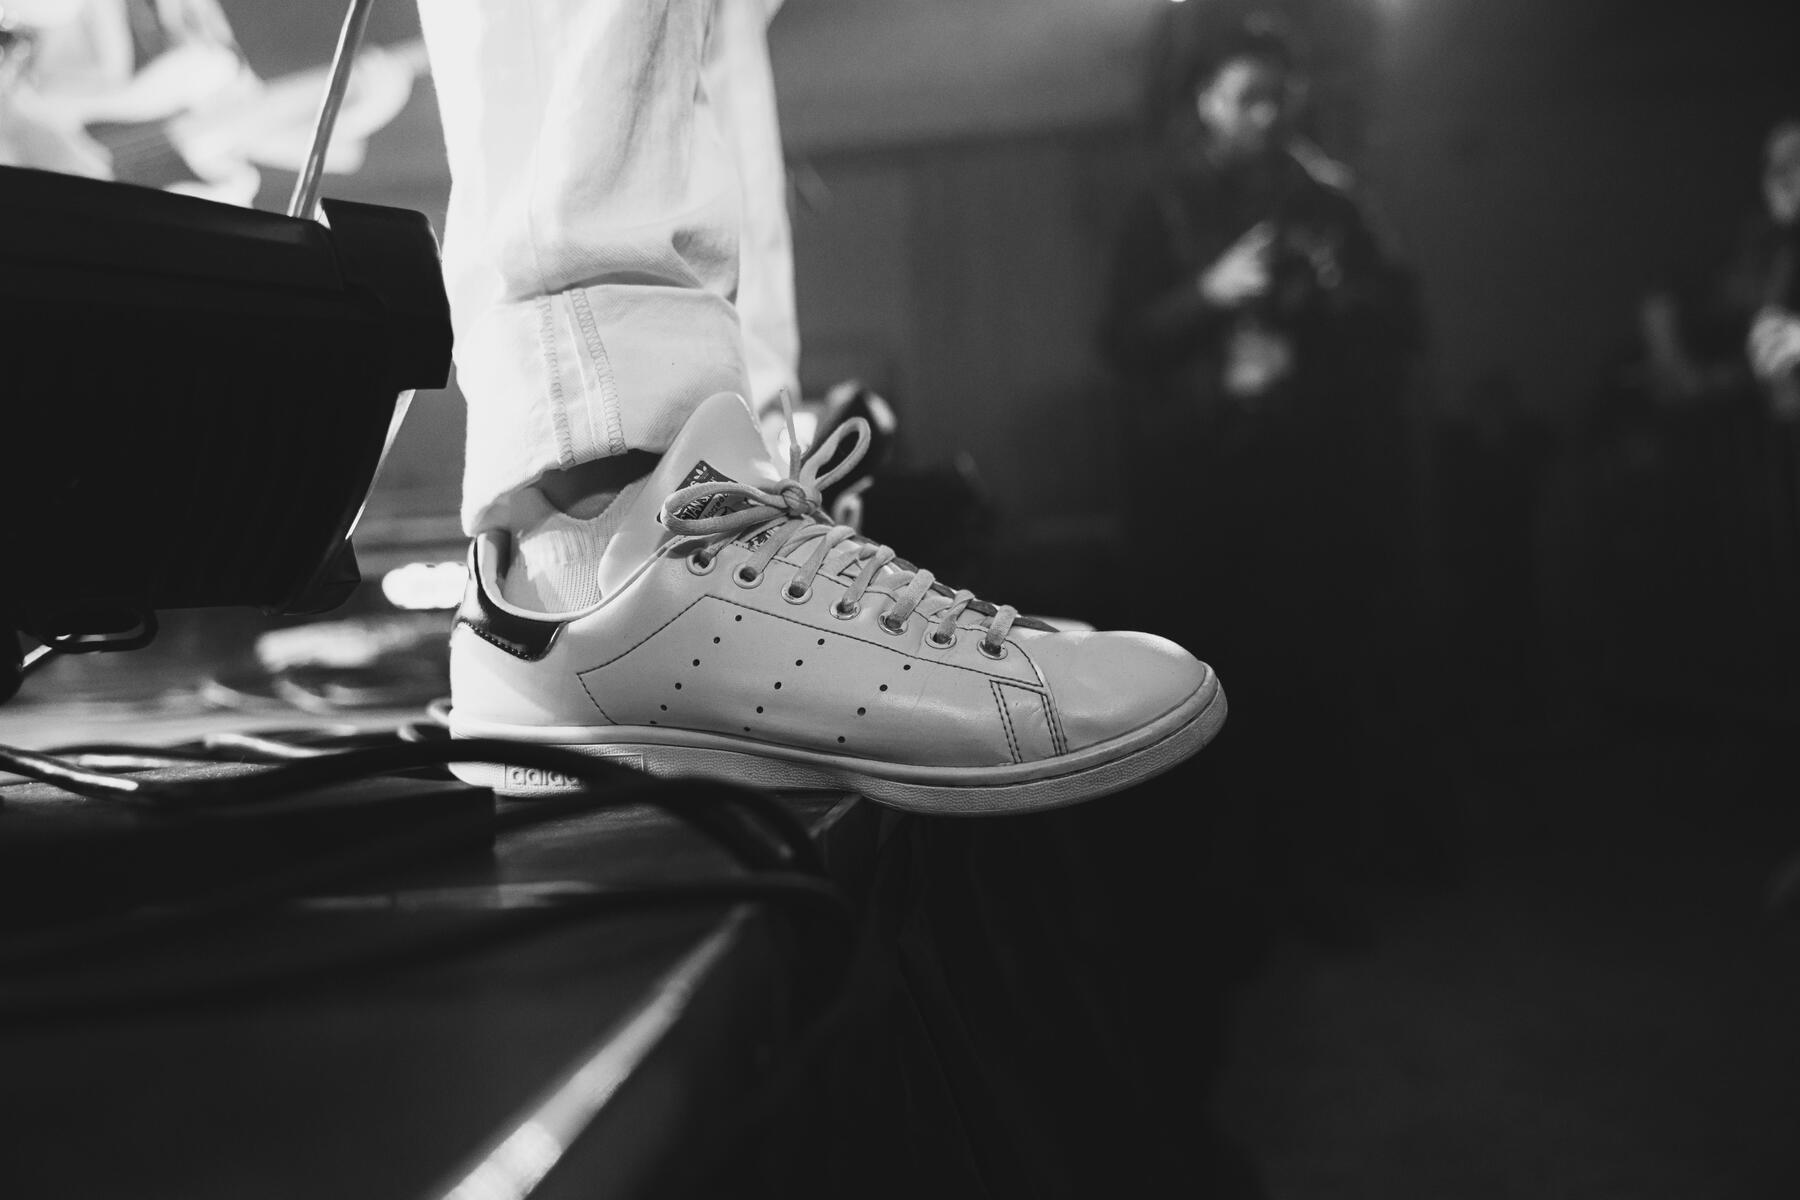 Black and white image of lead vocalist's shoe hanging off the edge of the stage. Band is "Stars"